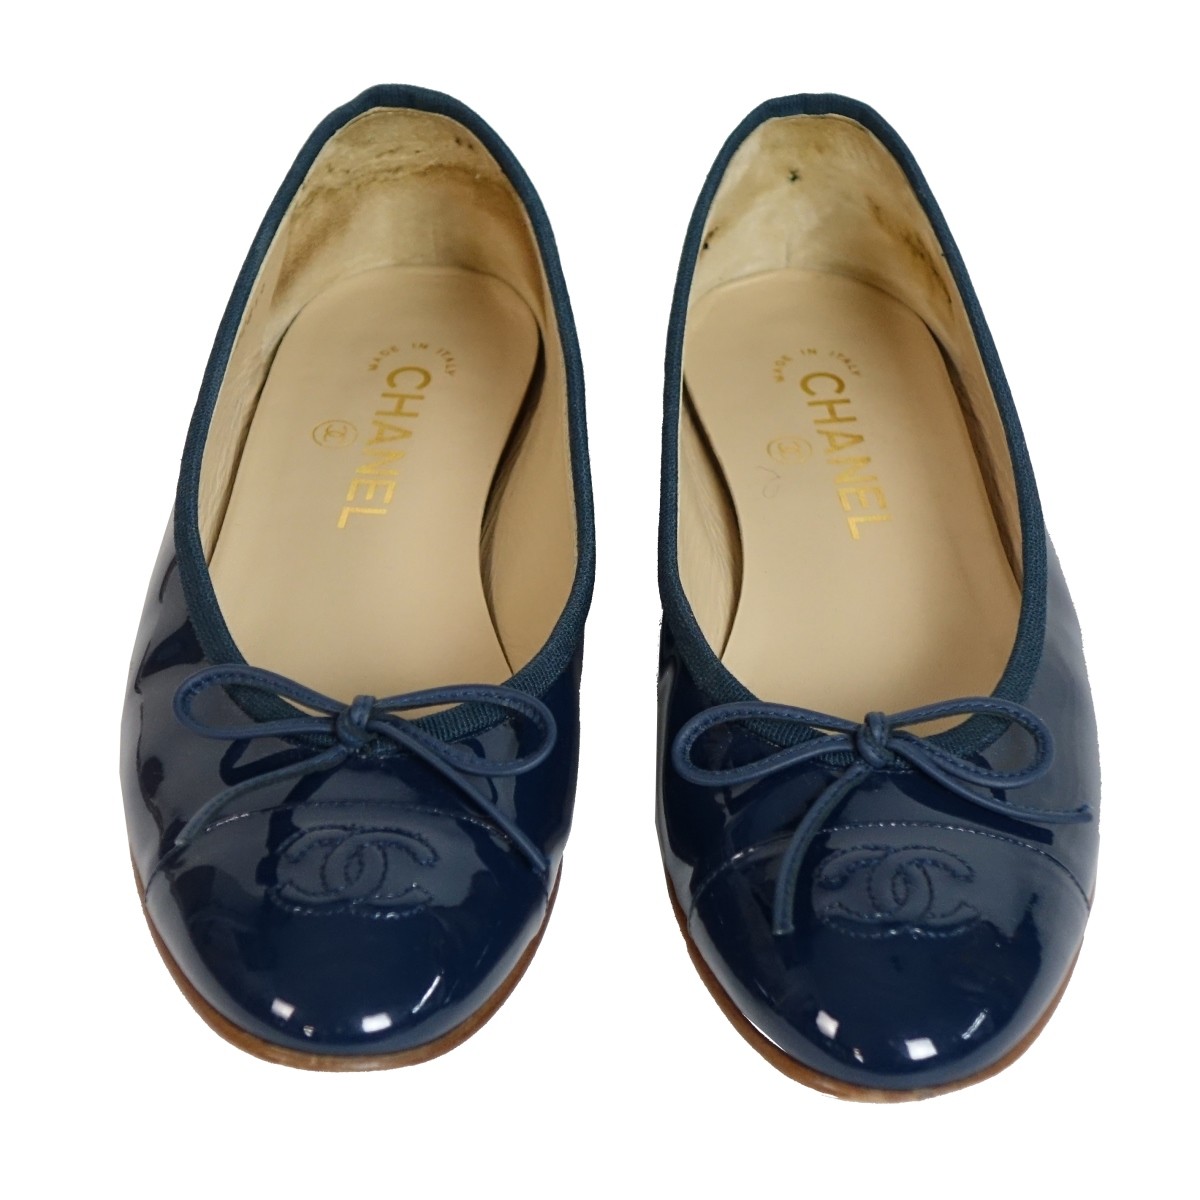 Chanel Patent Leather Ballet Flats